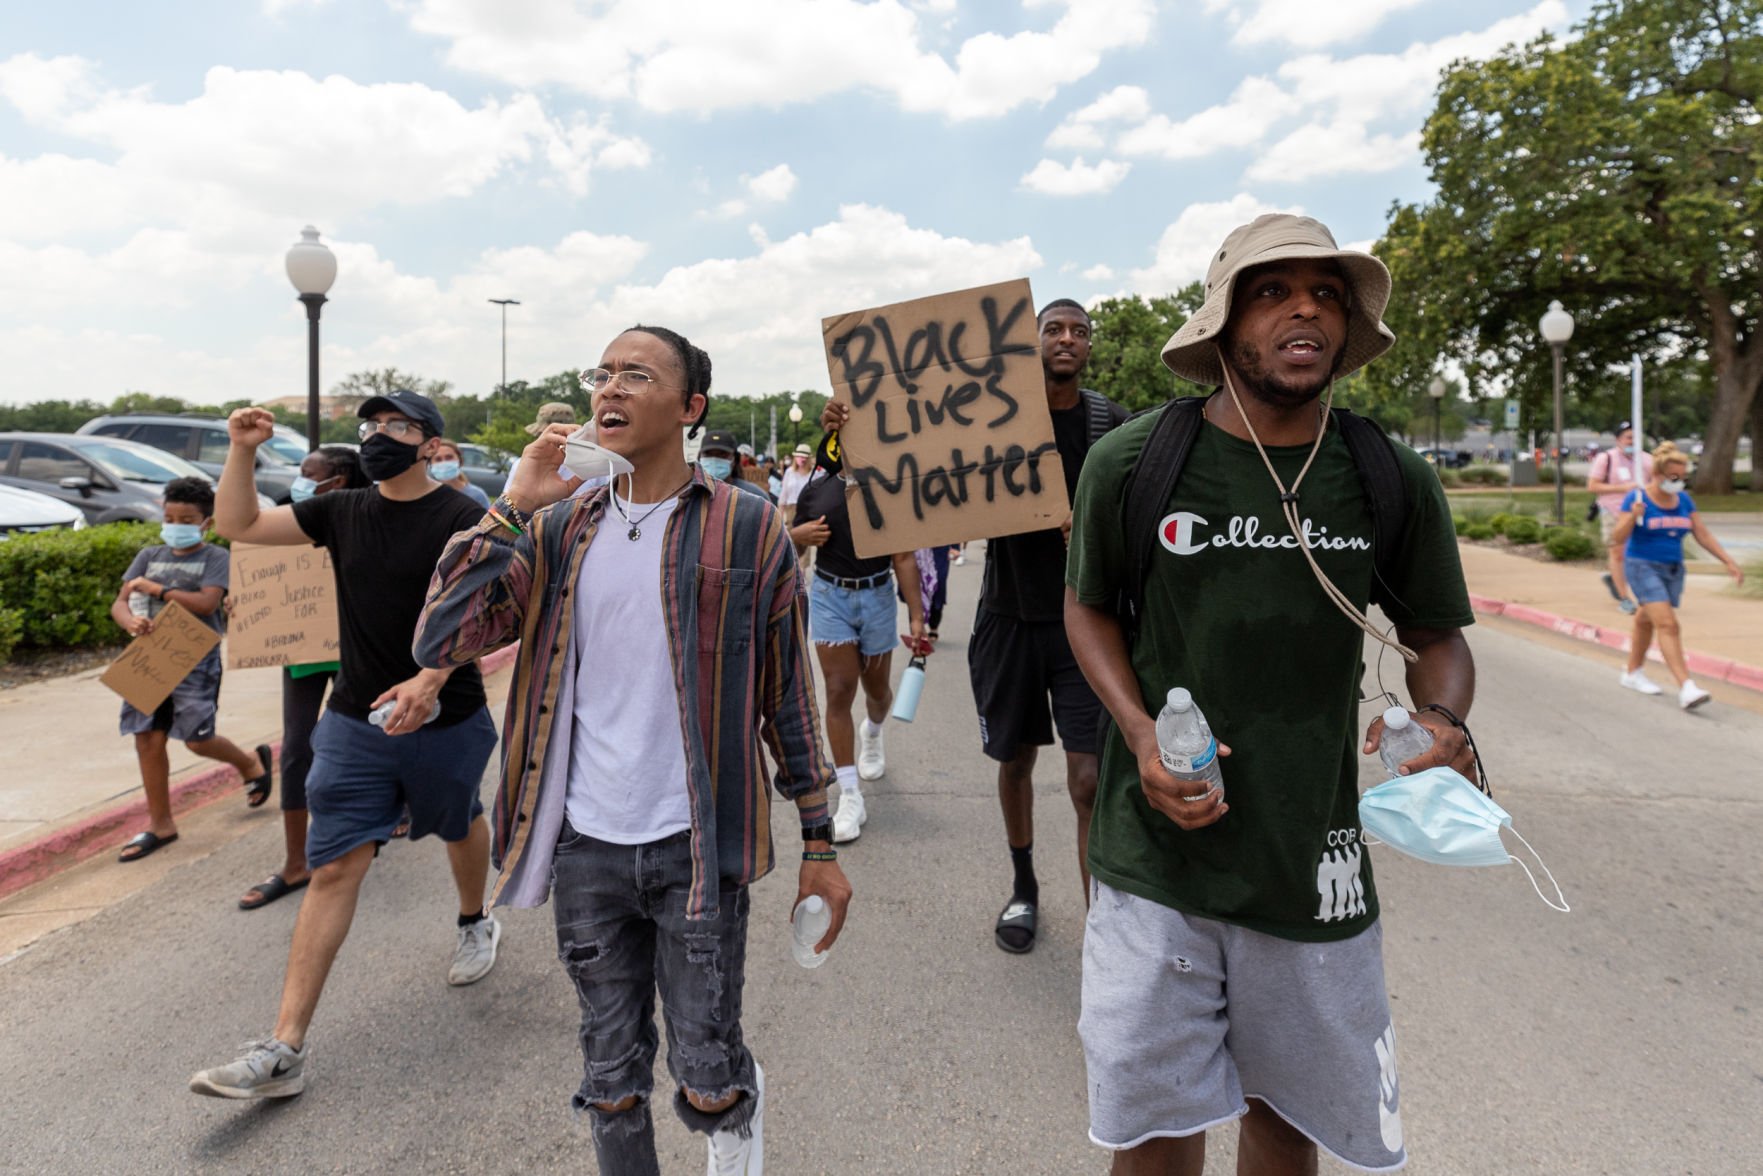 That could've been me': UTA students march, seek systemic change